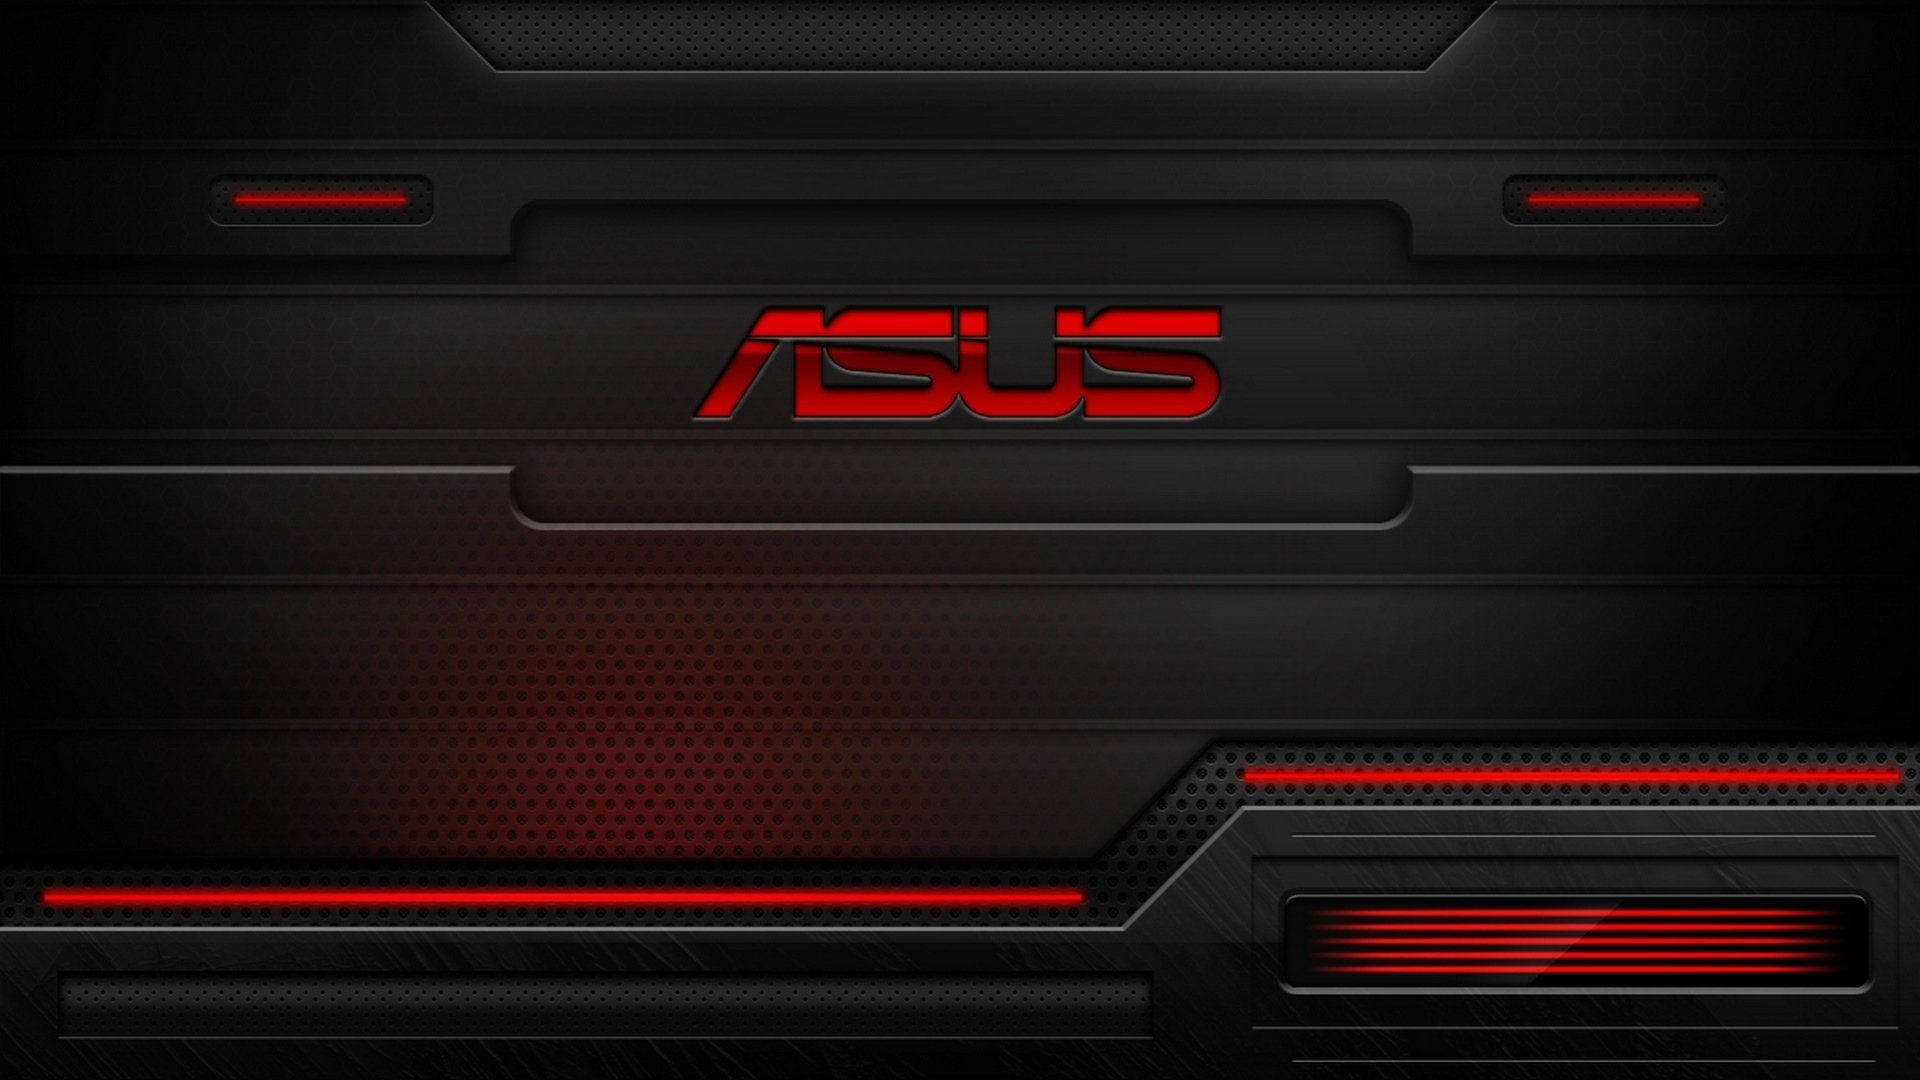 Pulsing in Red - The Asus Neon Logo Wallpaper